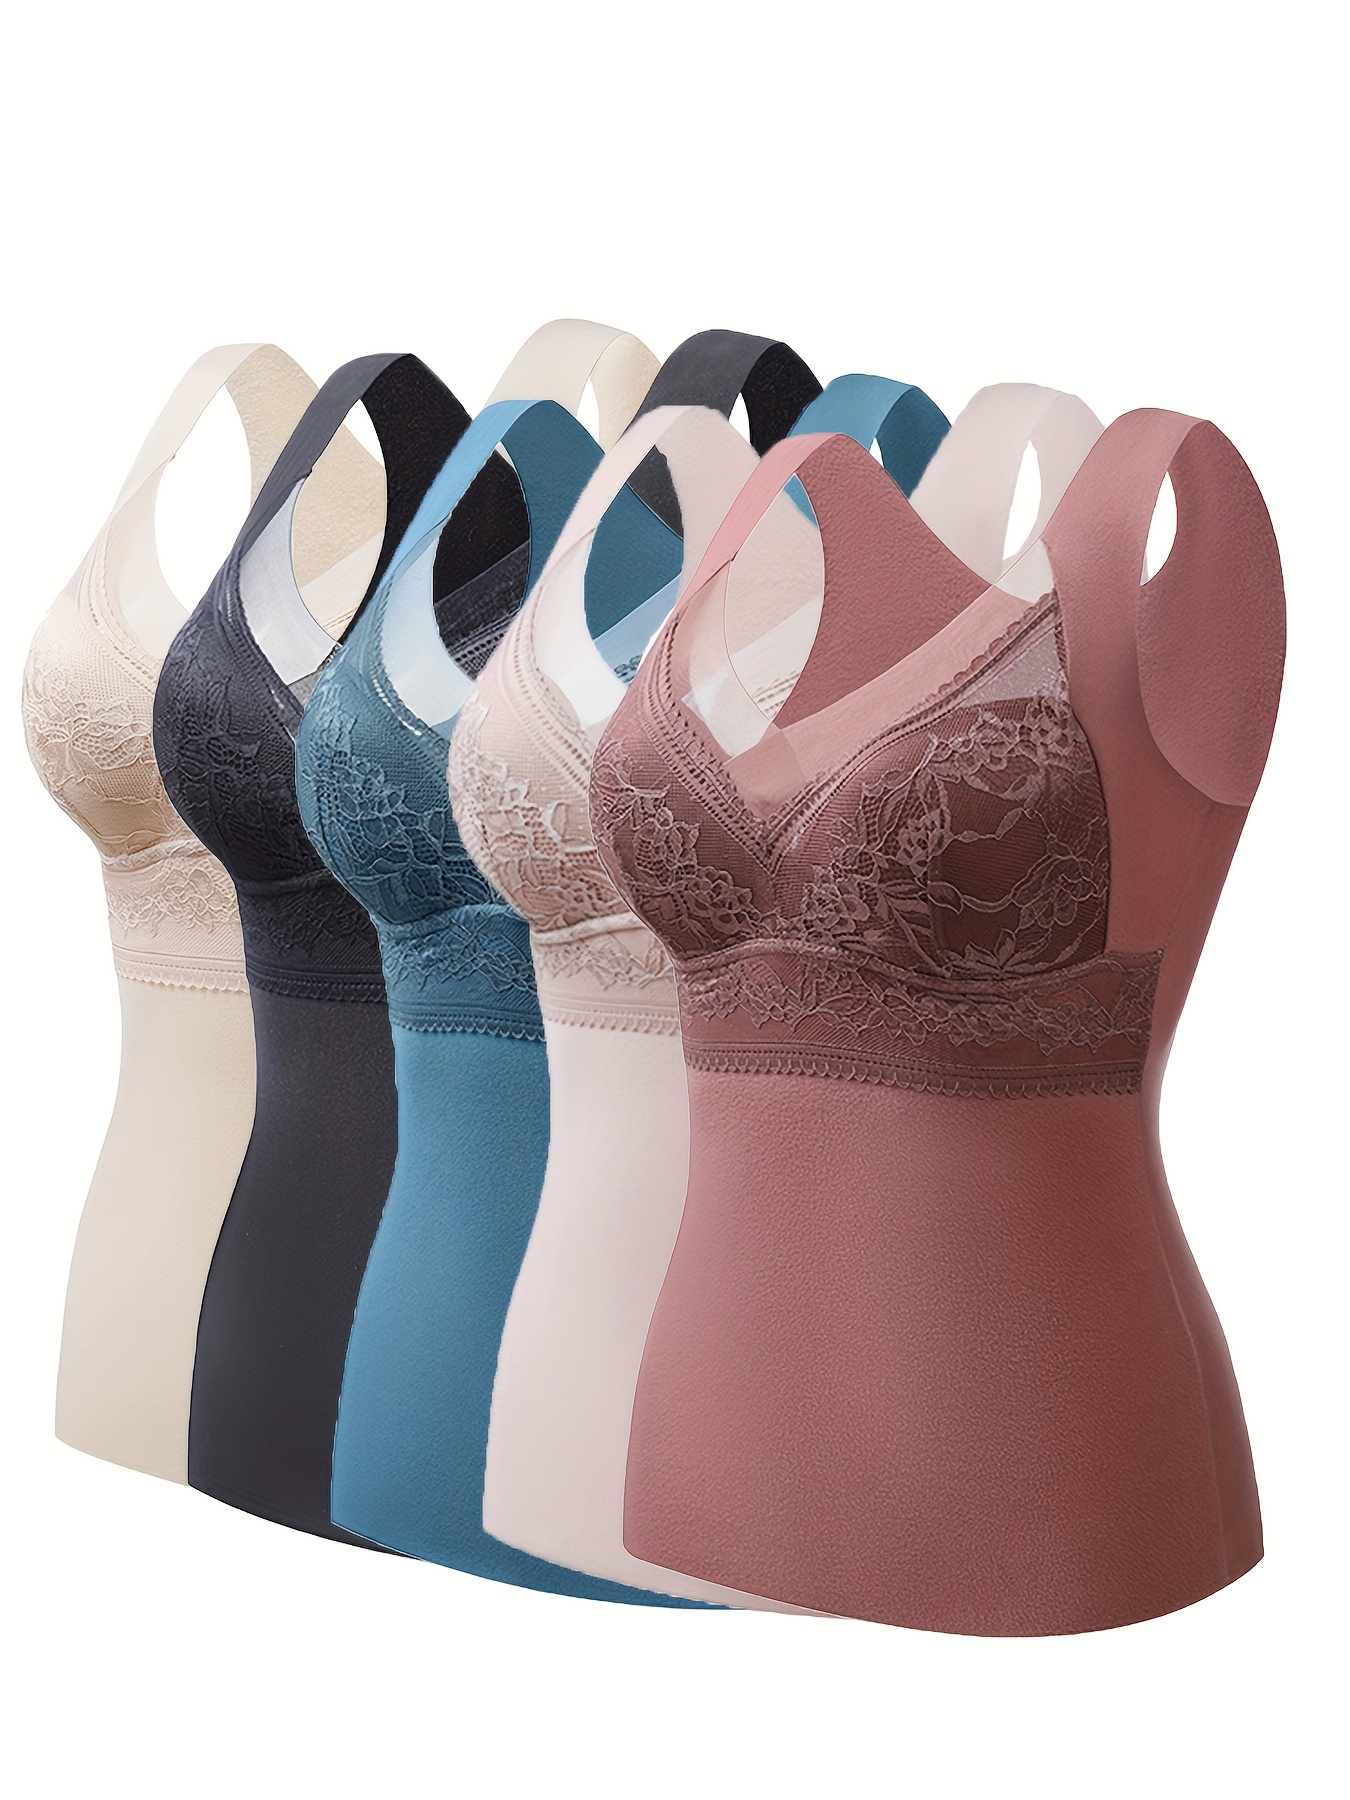 Thermal Fleece Lined Racerback Lace Camisole Set For Women Warm